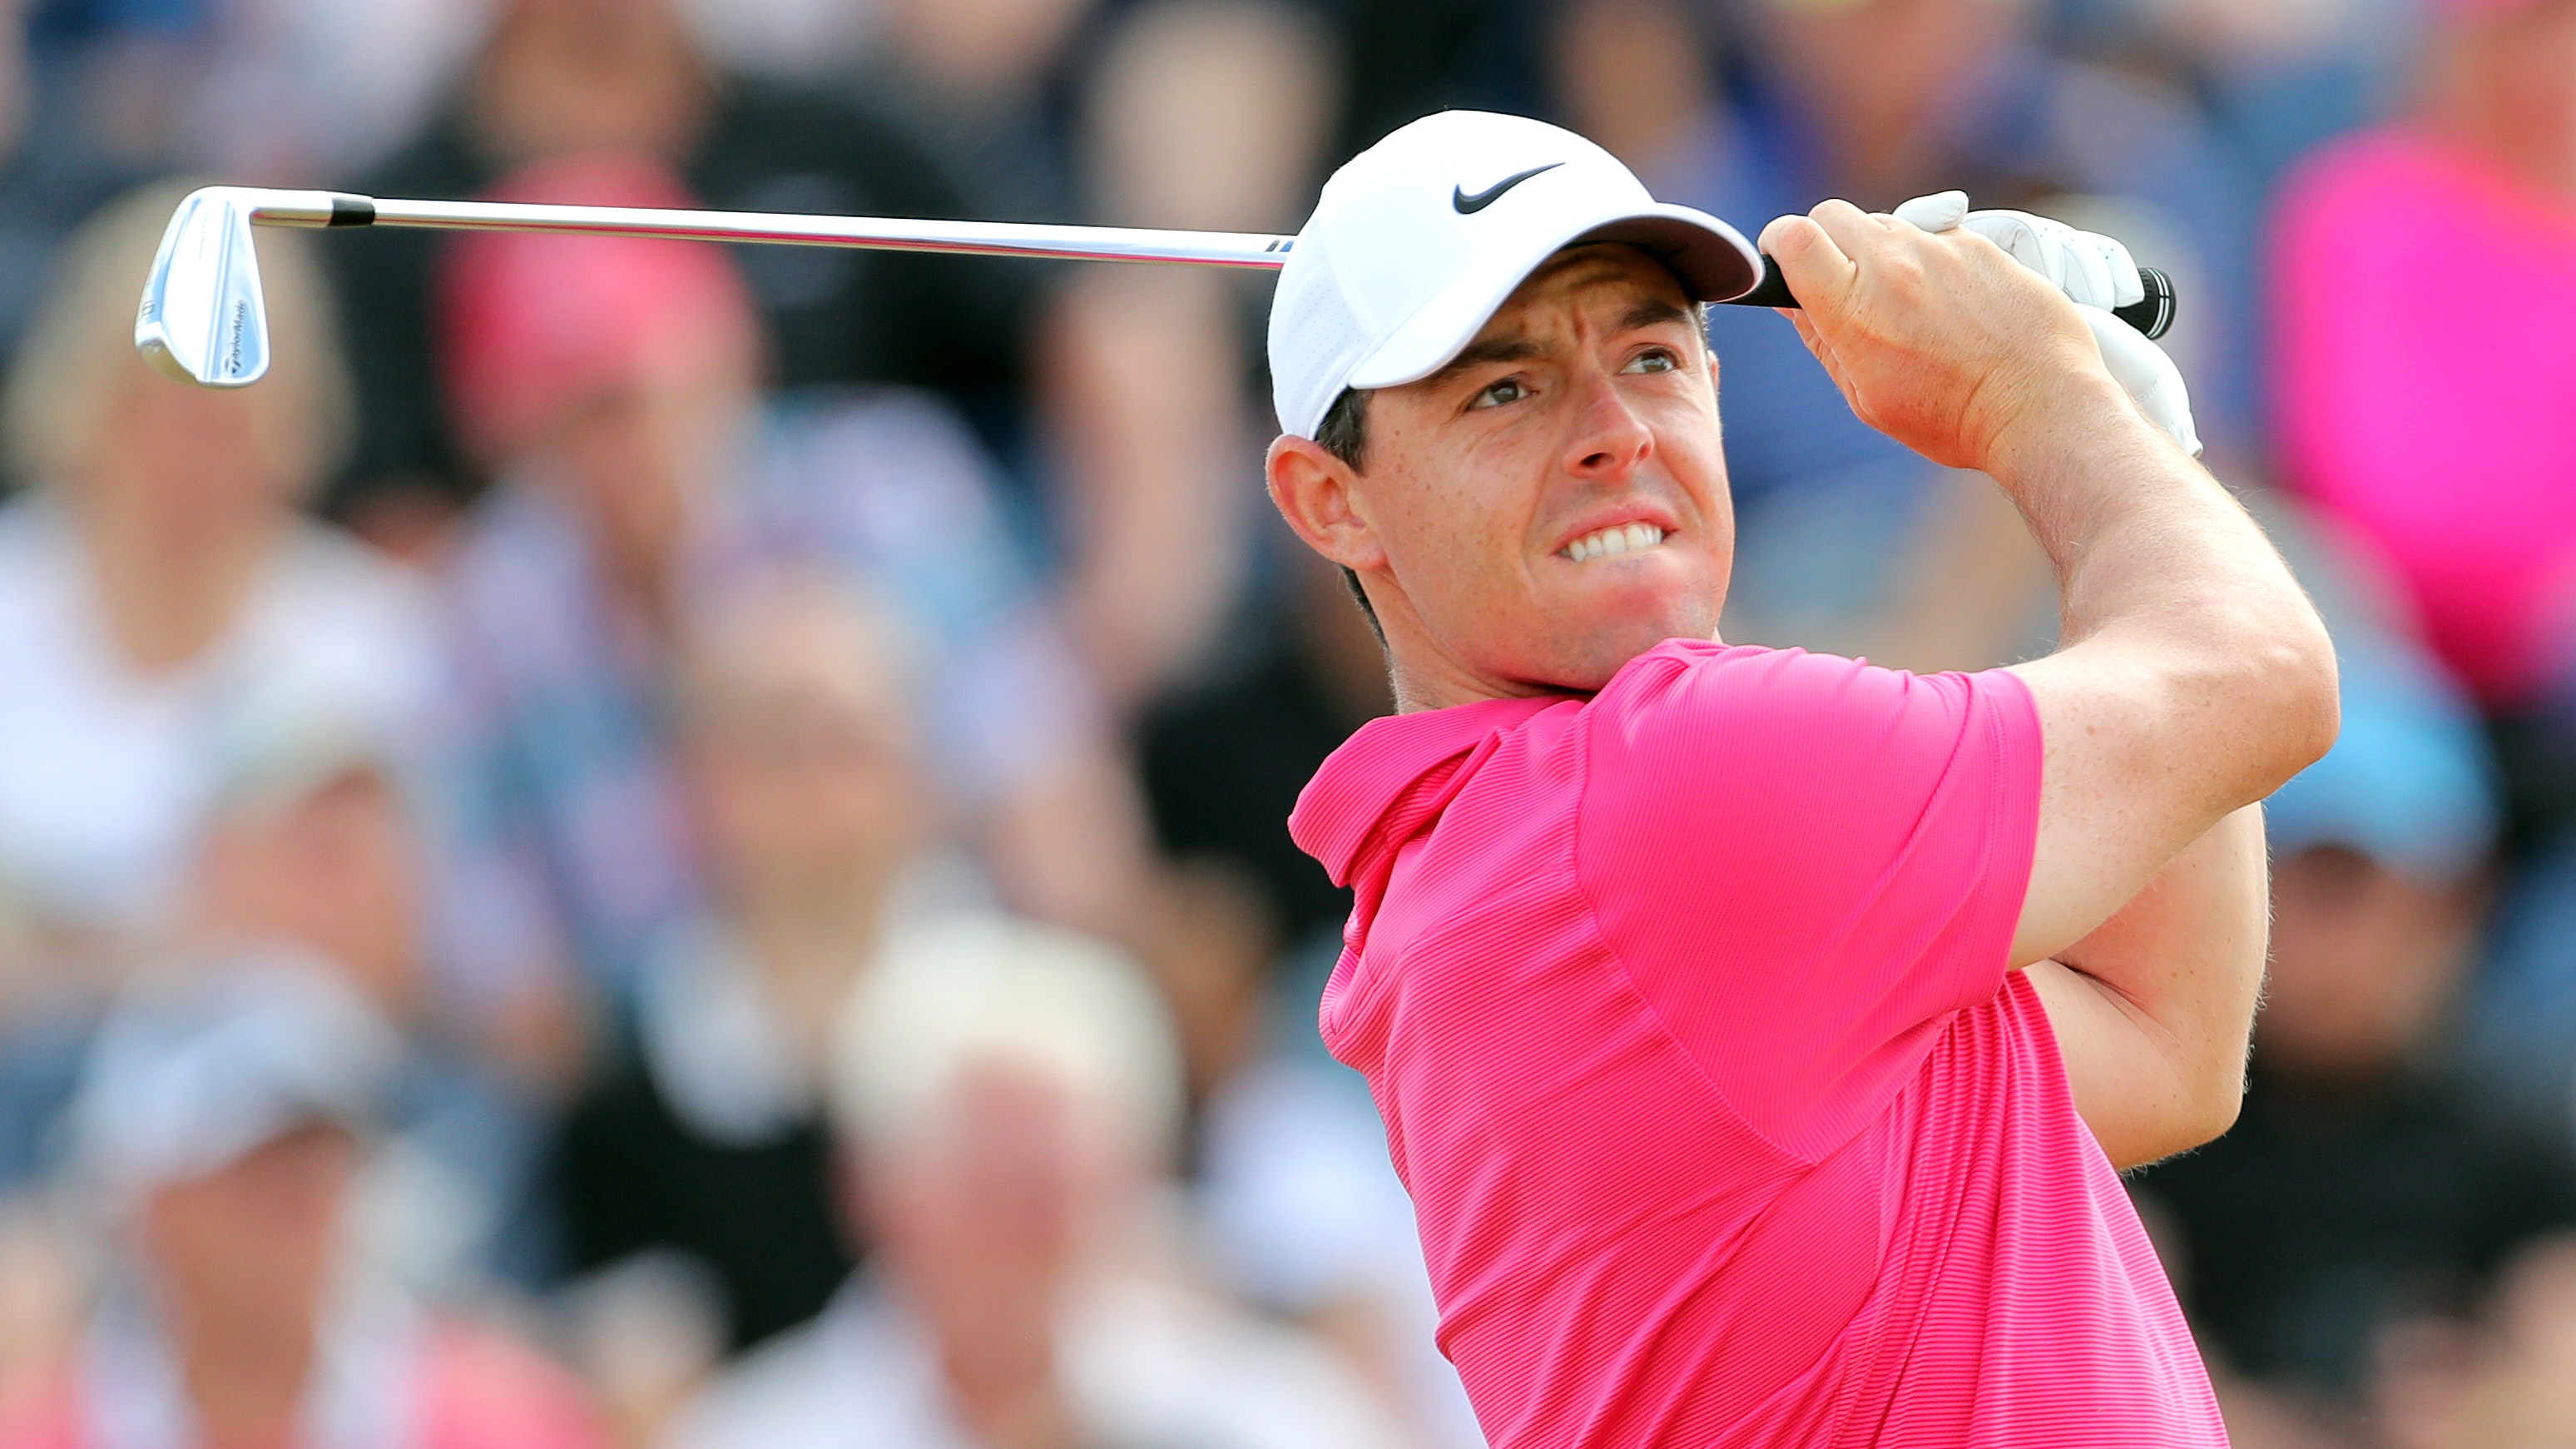 Rory McIlroy: I'd move to San Diego if taxes weren't so high